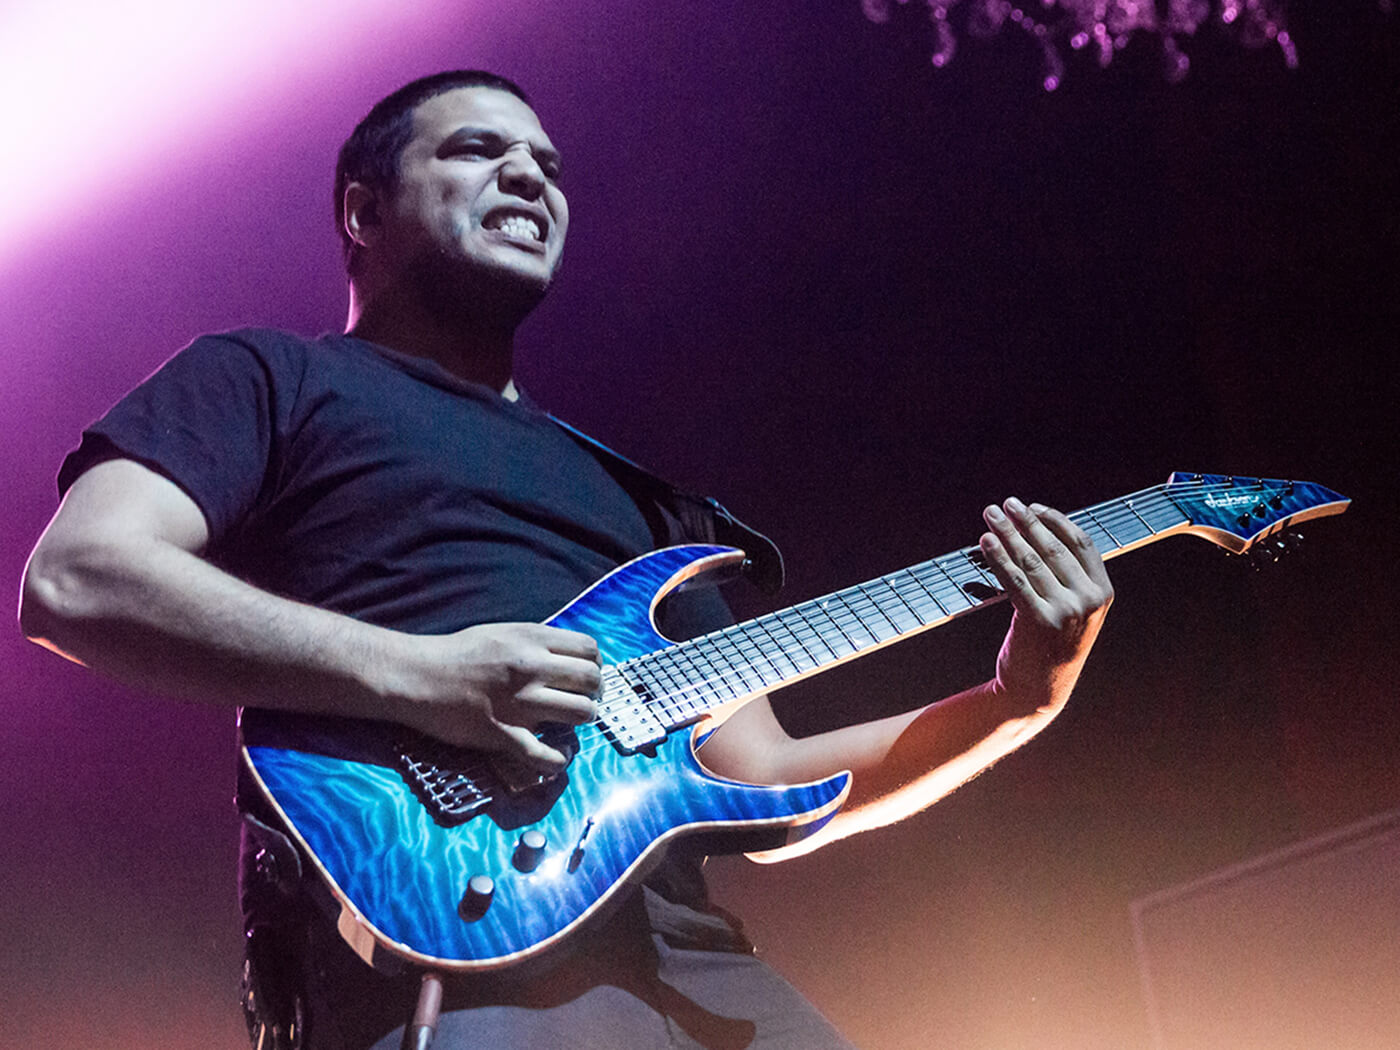 Misha Mansoor of Periphery performing with a Jackson guitar in 2015, photo by Miikka Skaffari/Getty Images